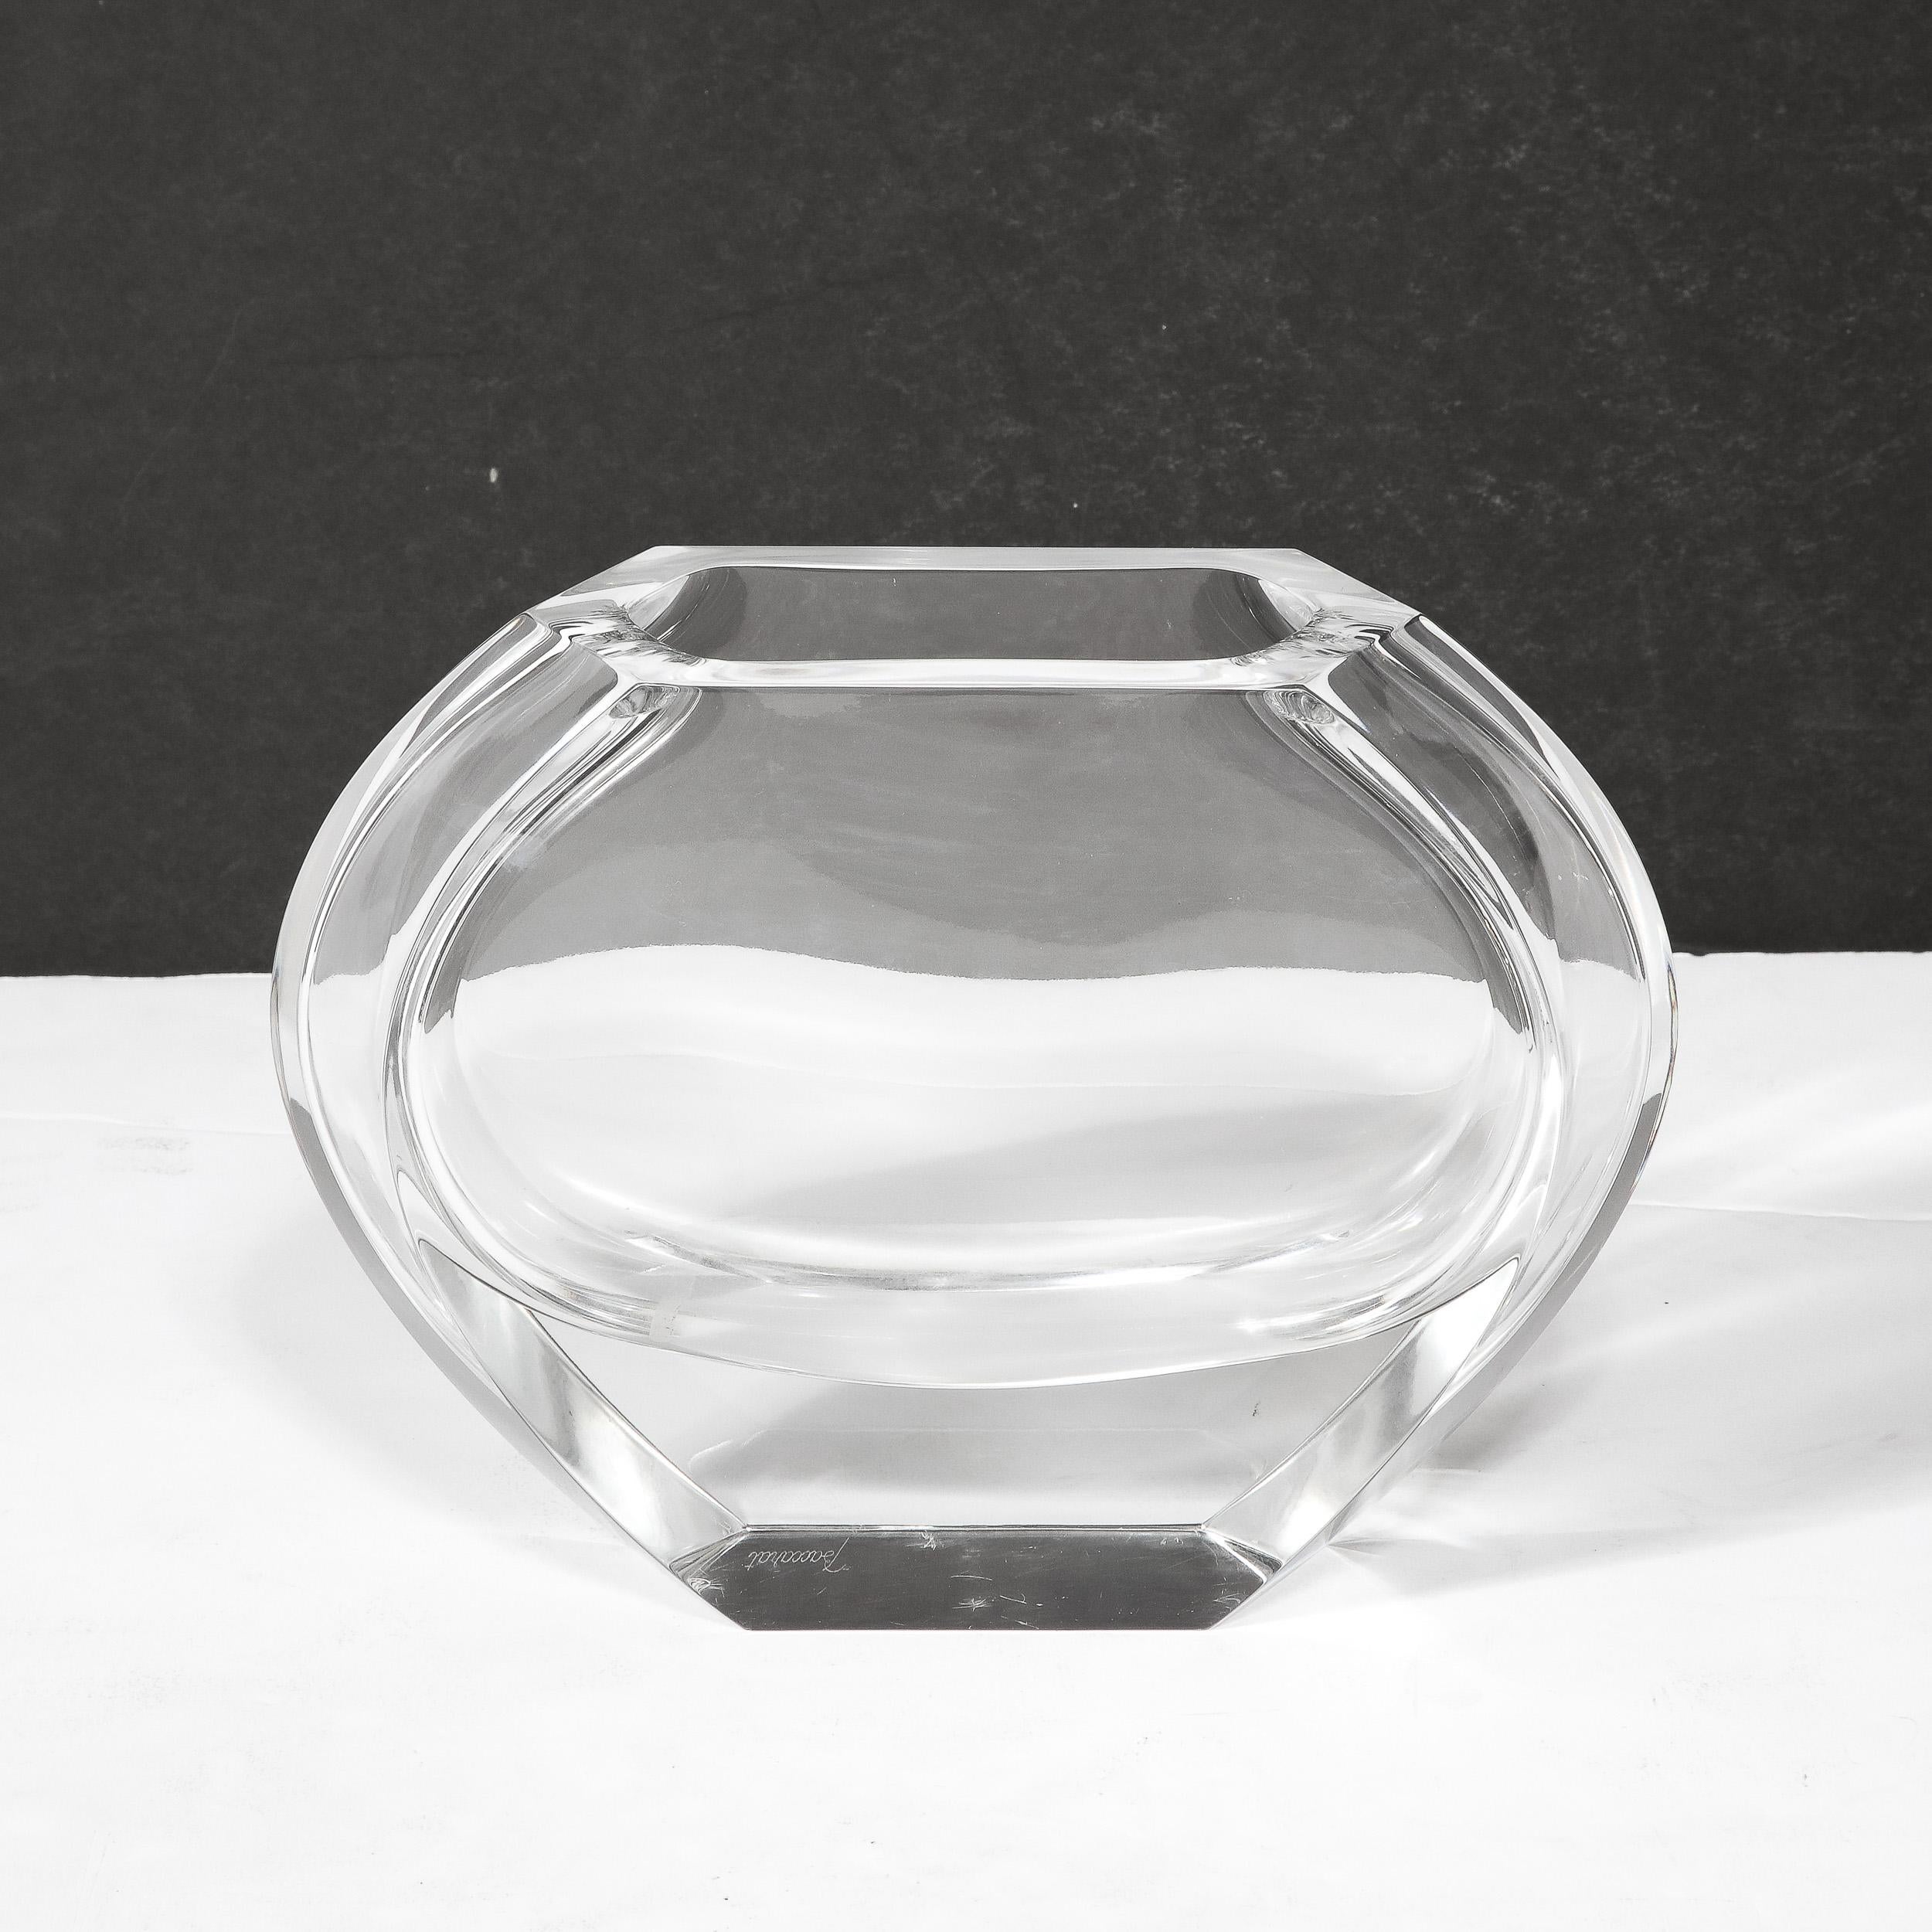 This Mid-Century Modernist Crystal Vase by the esteemed glass manufacturer Baccarat originates from France, Circa 1960. Composed of walls of transparent crystal that lead to a substantially thick and prismatic base, the outer edges of the curved